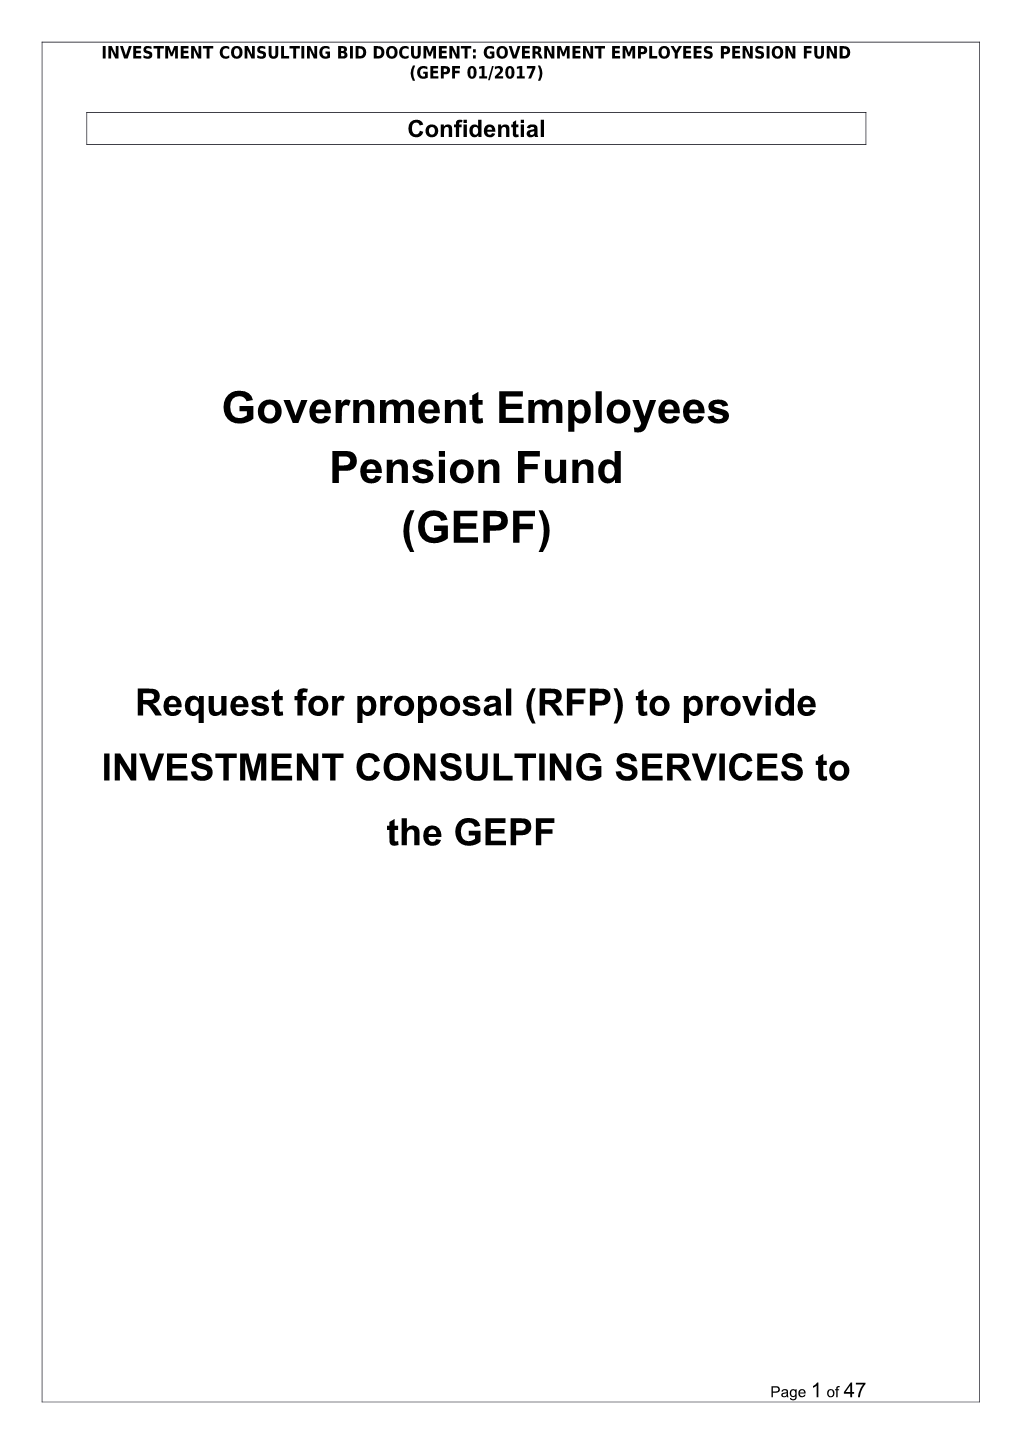 Investment Consulting Bid Document: Government Employees Pension Fund(Gepf 01/2017)